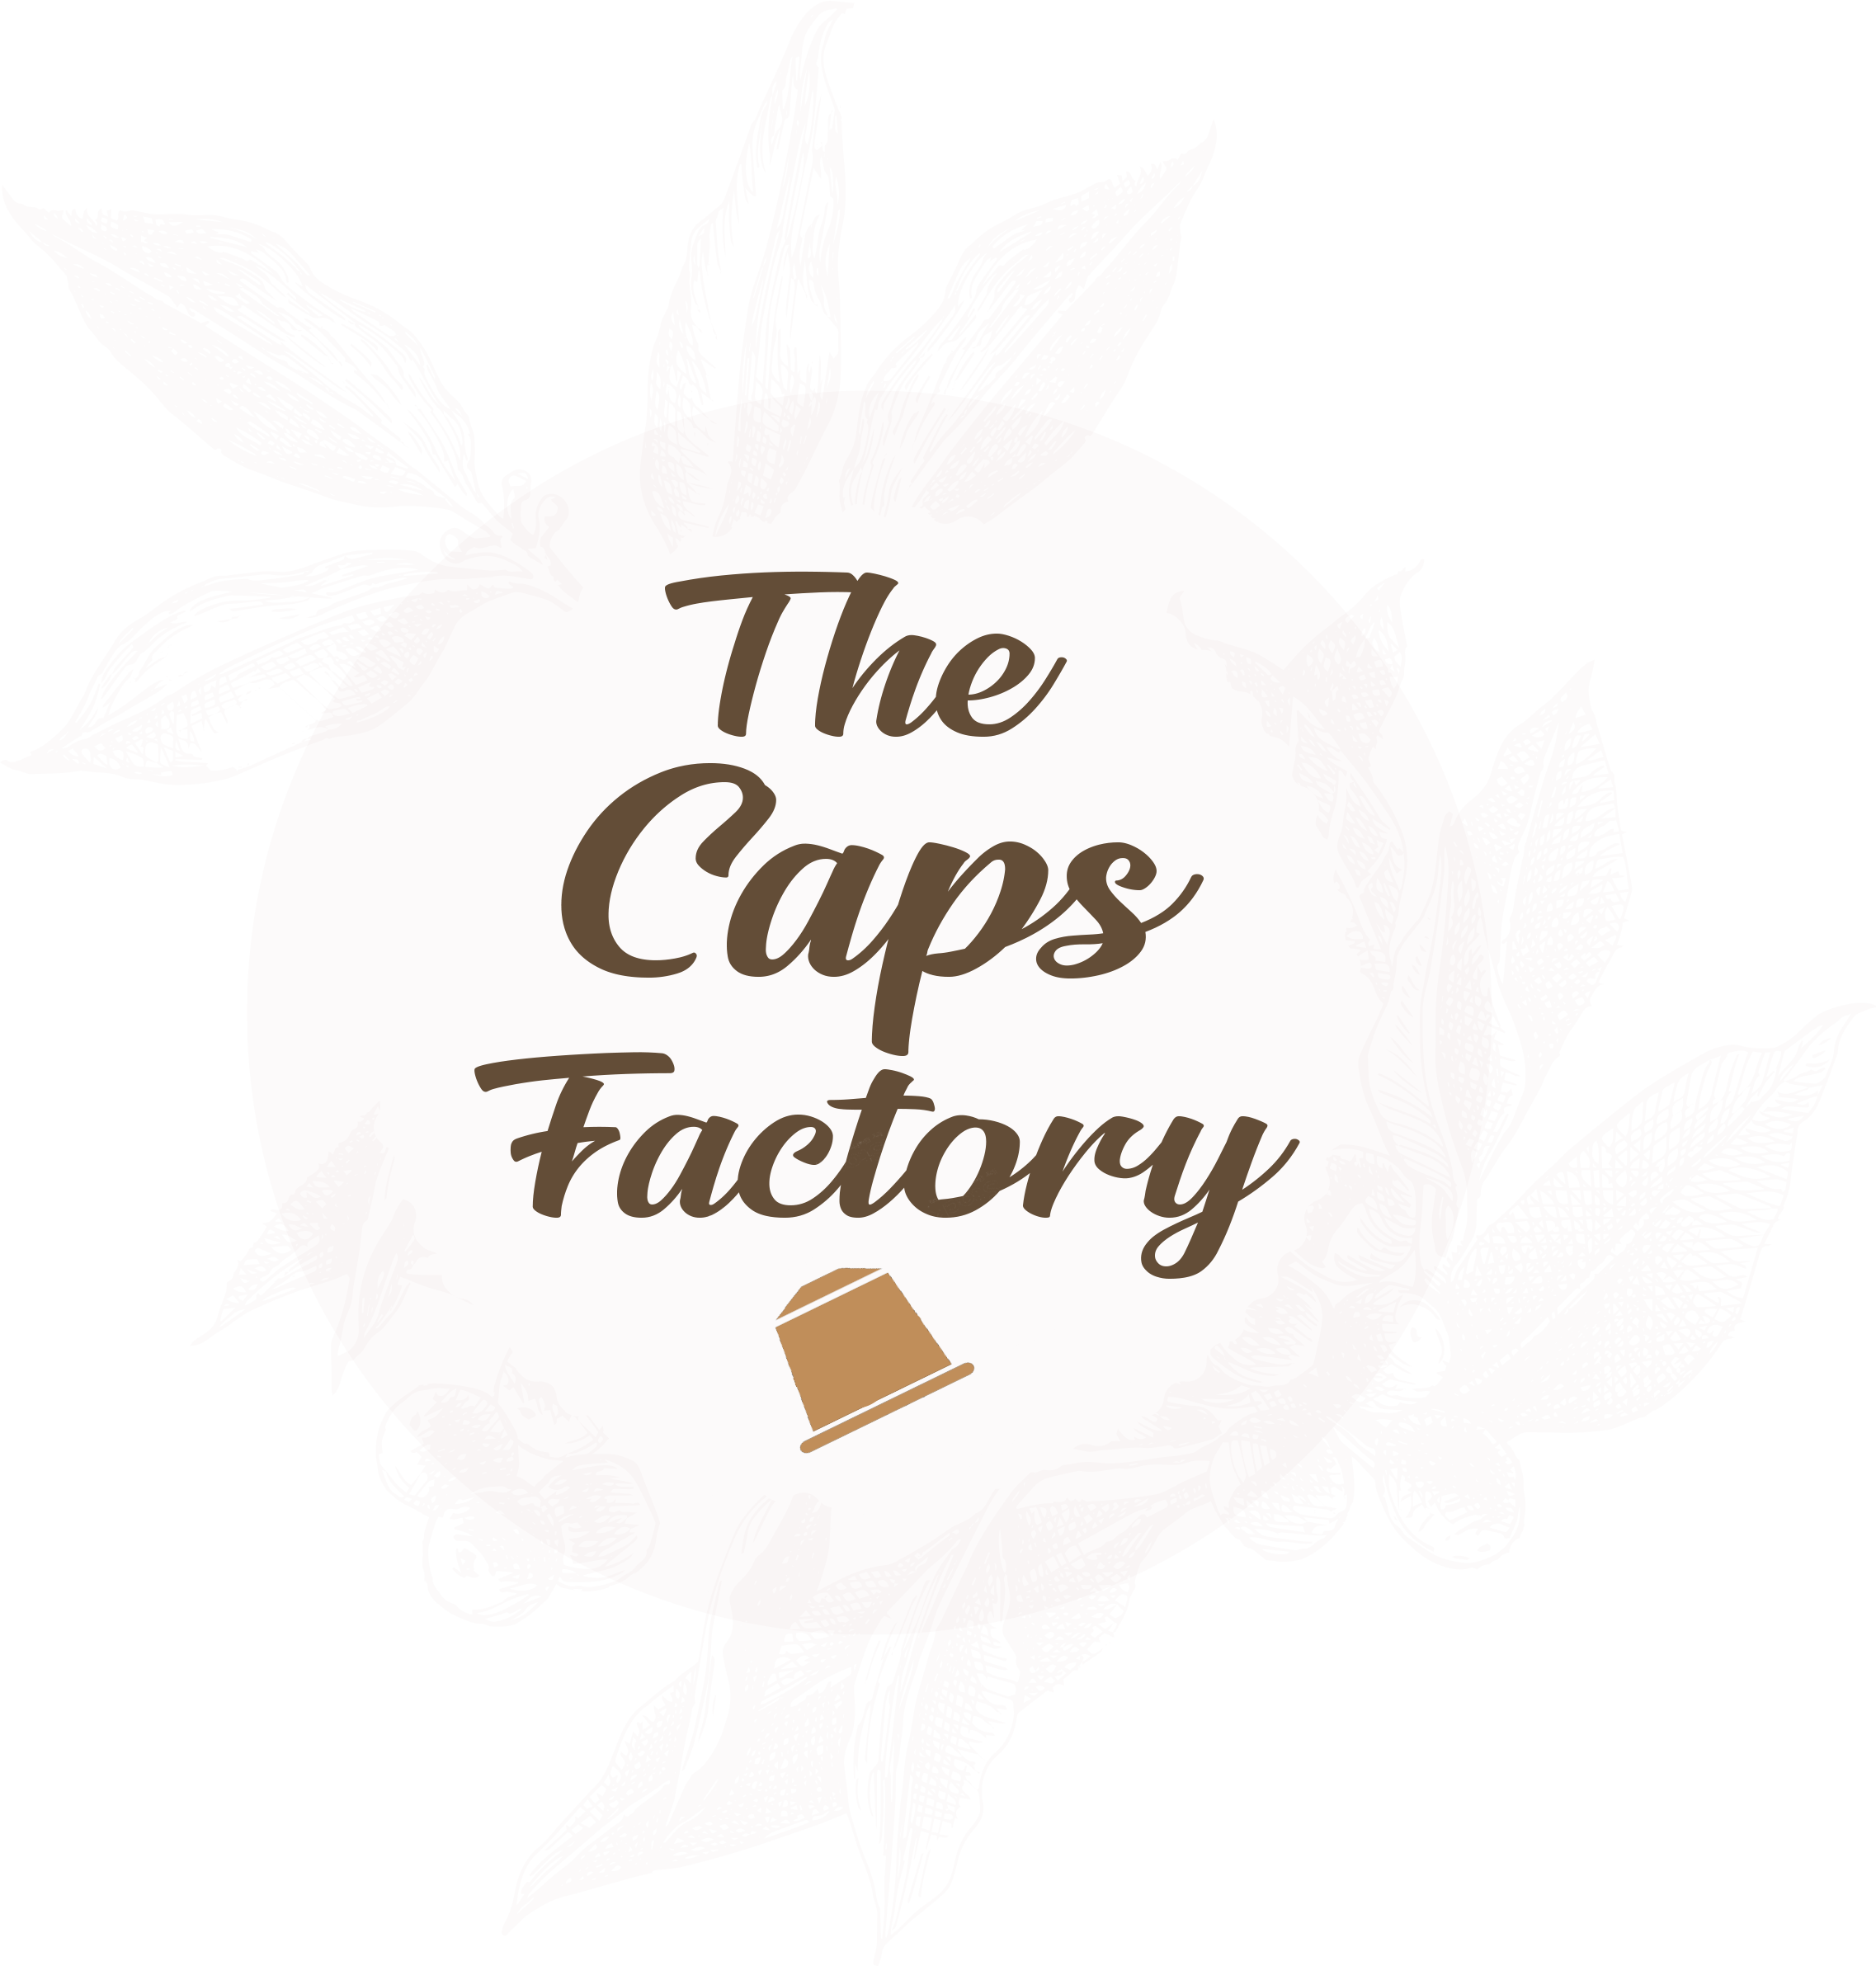 The Caps Factory